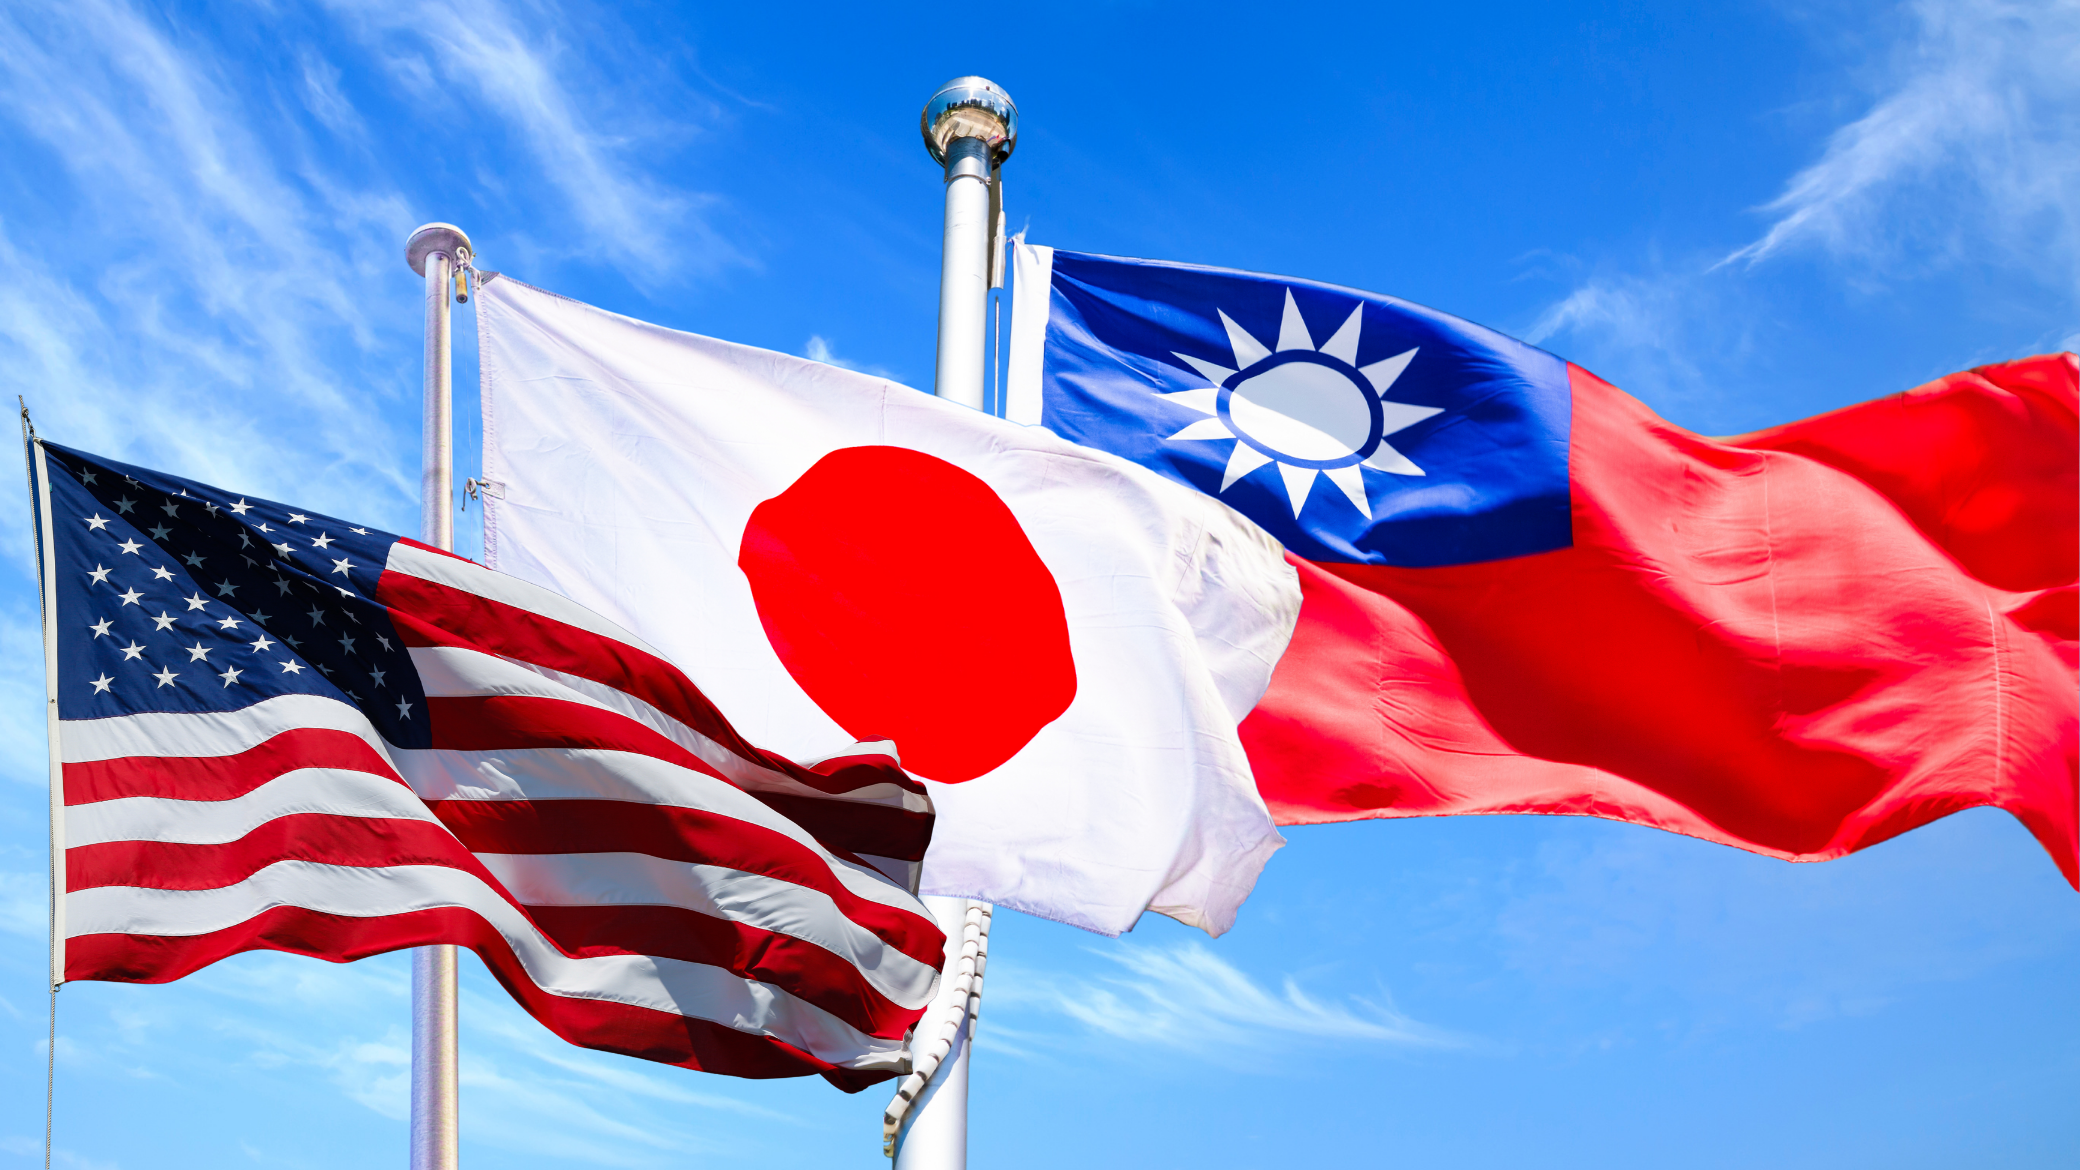 US-Japan-Taiwan Security Trilateral: Now Is the Time